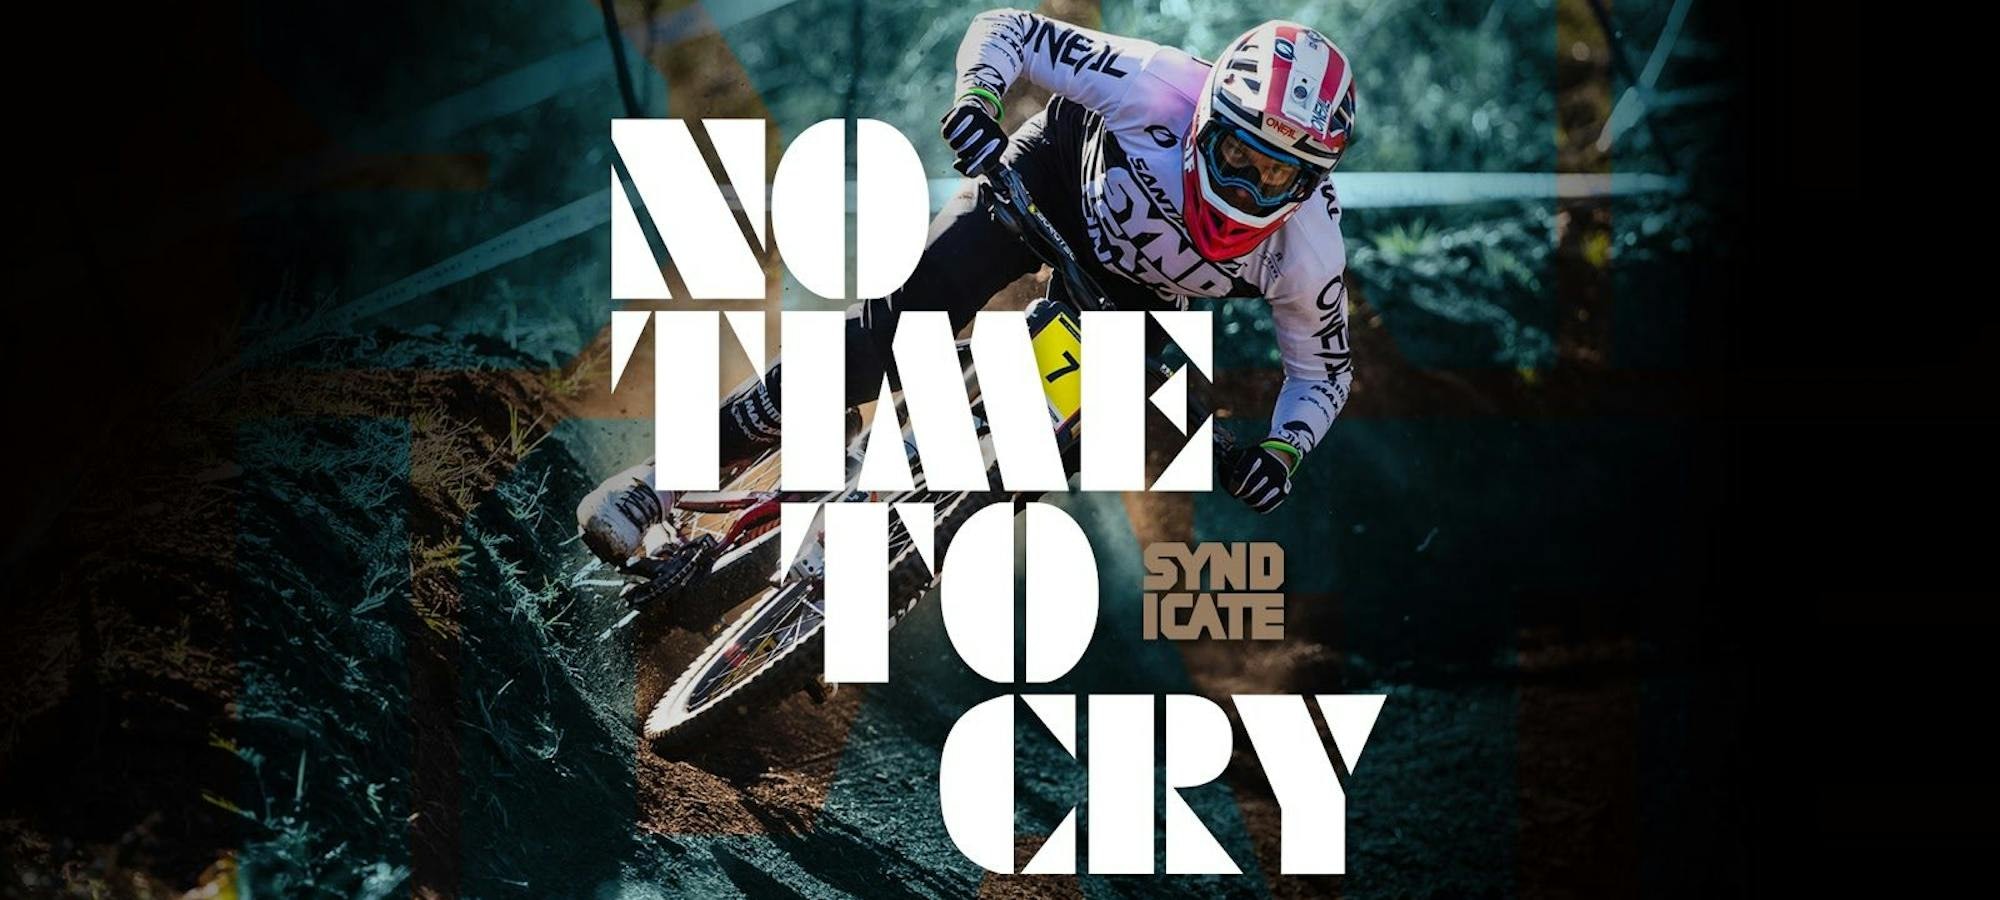 No Time to Cry Poster, with Greg Minnaar racing downhill